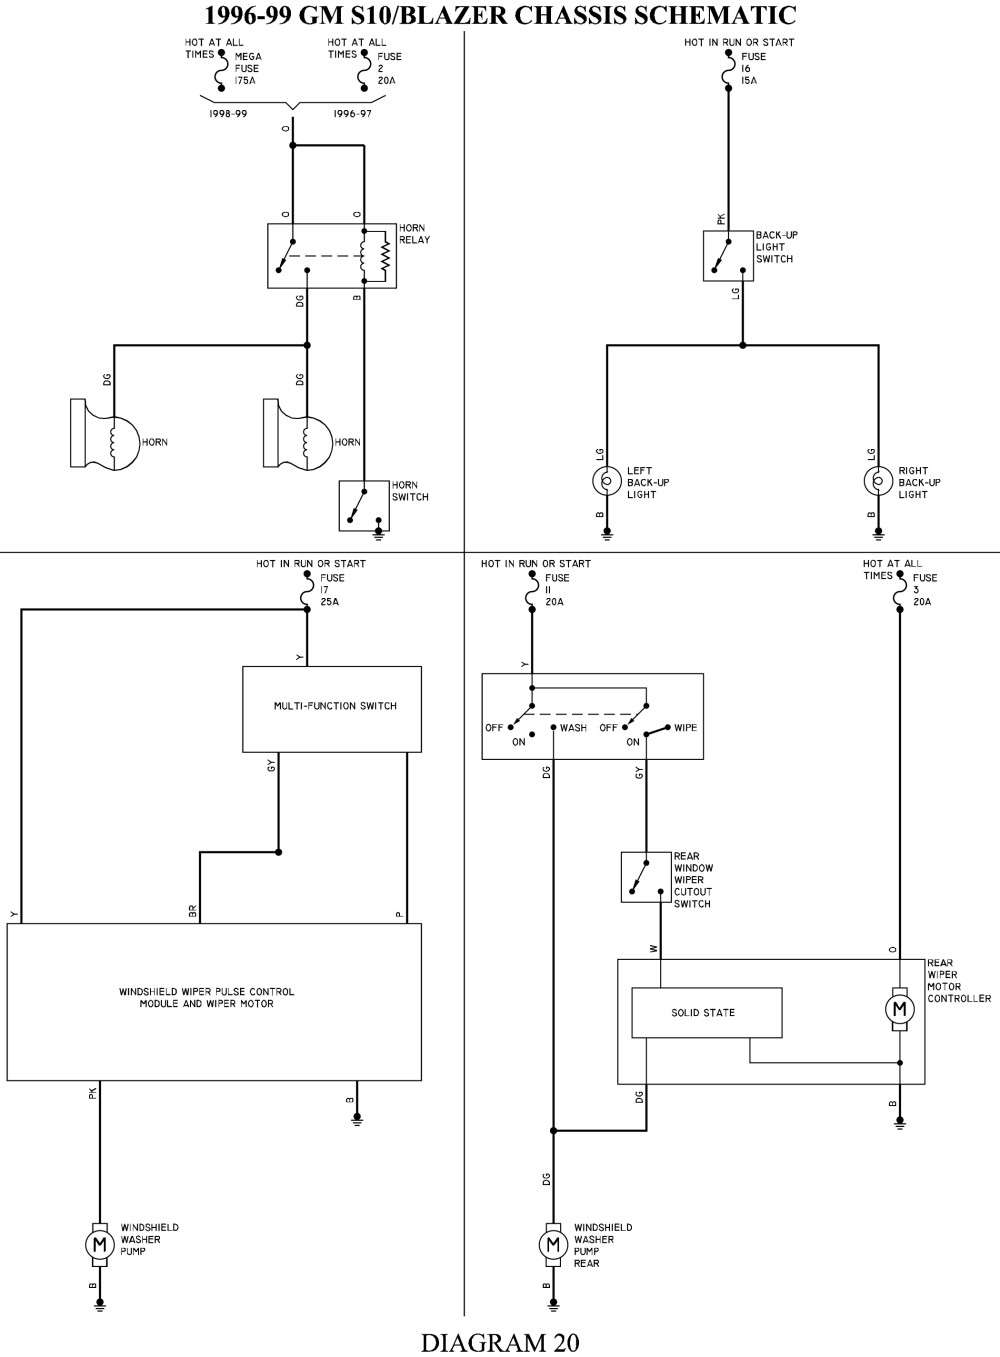 Wiring Diagram For A 1996 S 10 Transmission Wiring Diagram 1996 Chevy S10 Engine Diagram 1996 Chevy Blazer Wiring Diagram